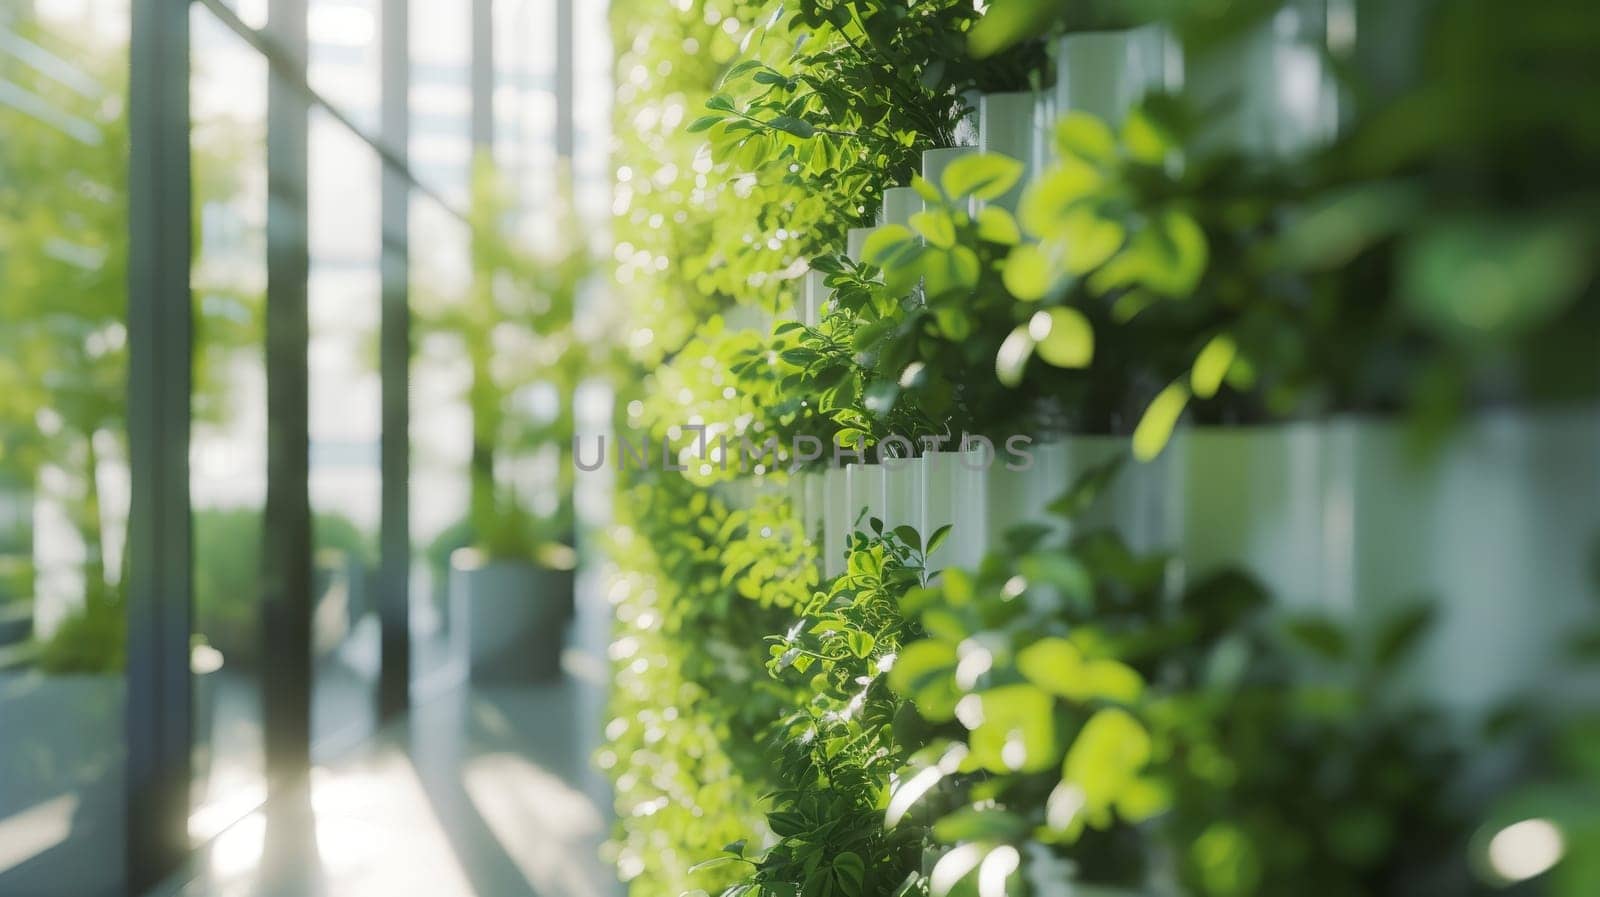 The image showcases an urban green wall inside a contemporary building, highlighting sustainable design with a focus on wellbeing and aesthetics. Sunlight filters through, enhancing the lush foliage.